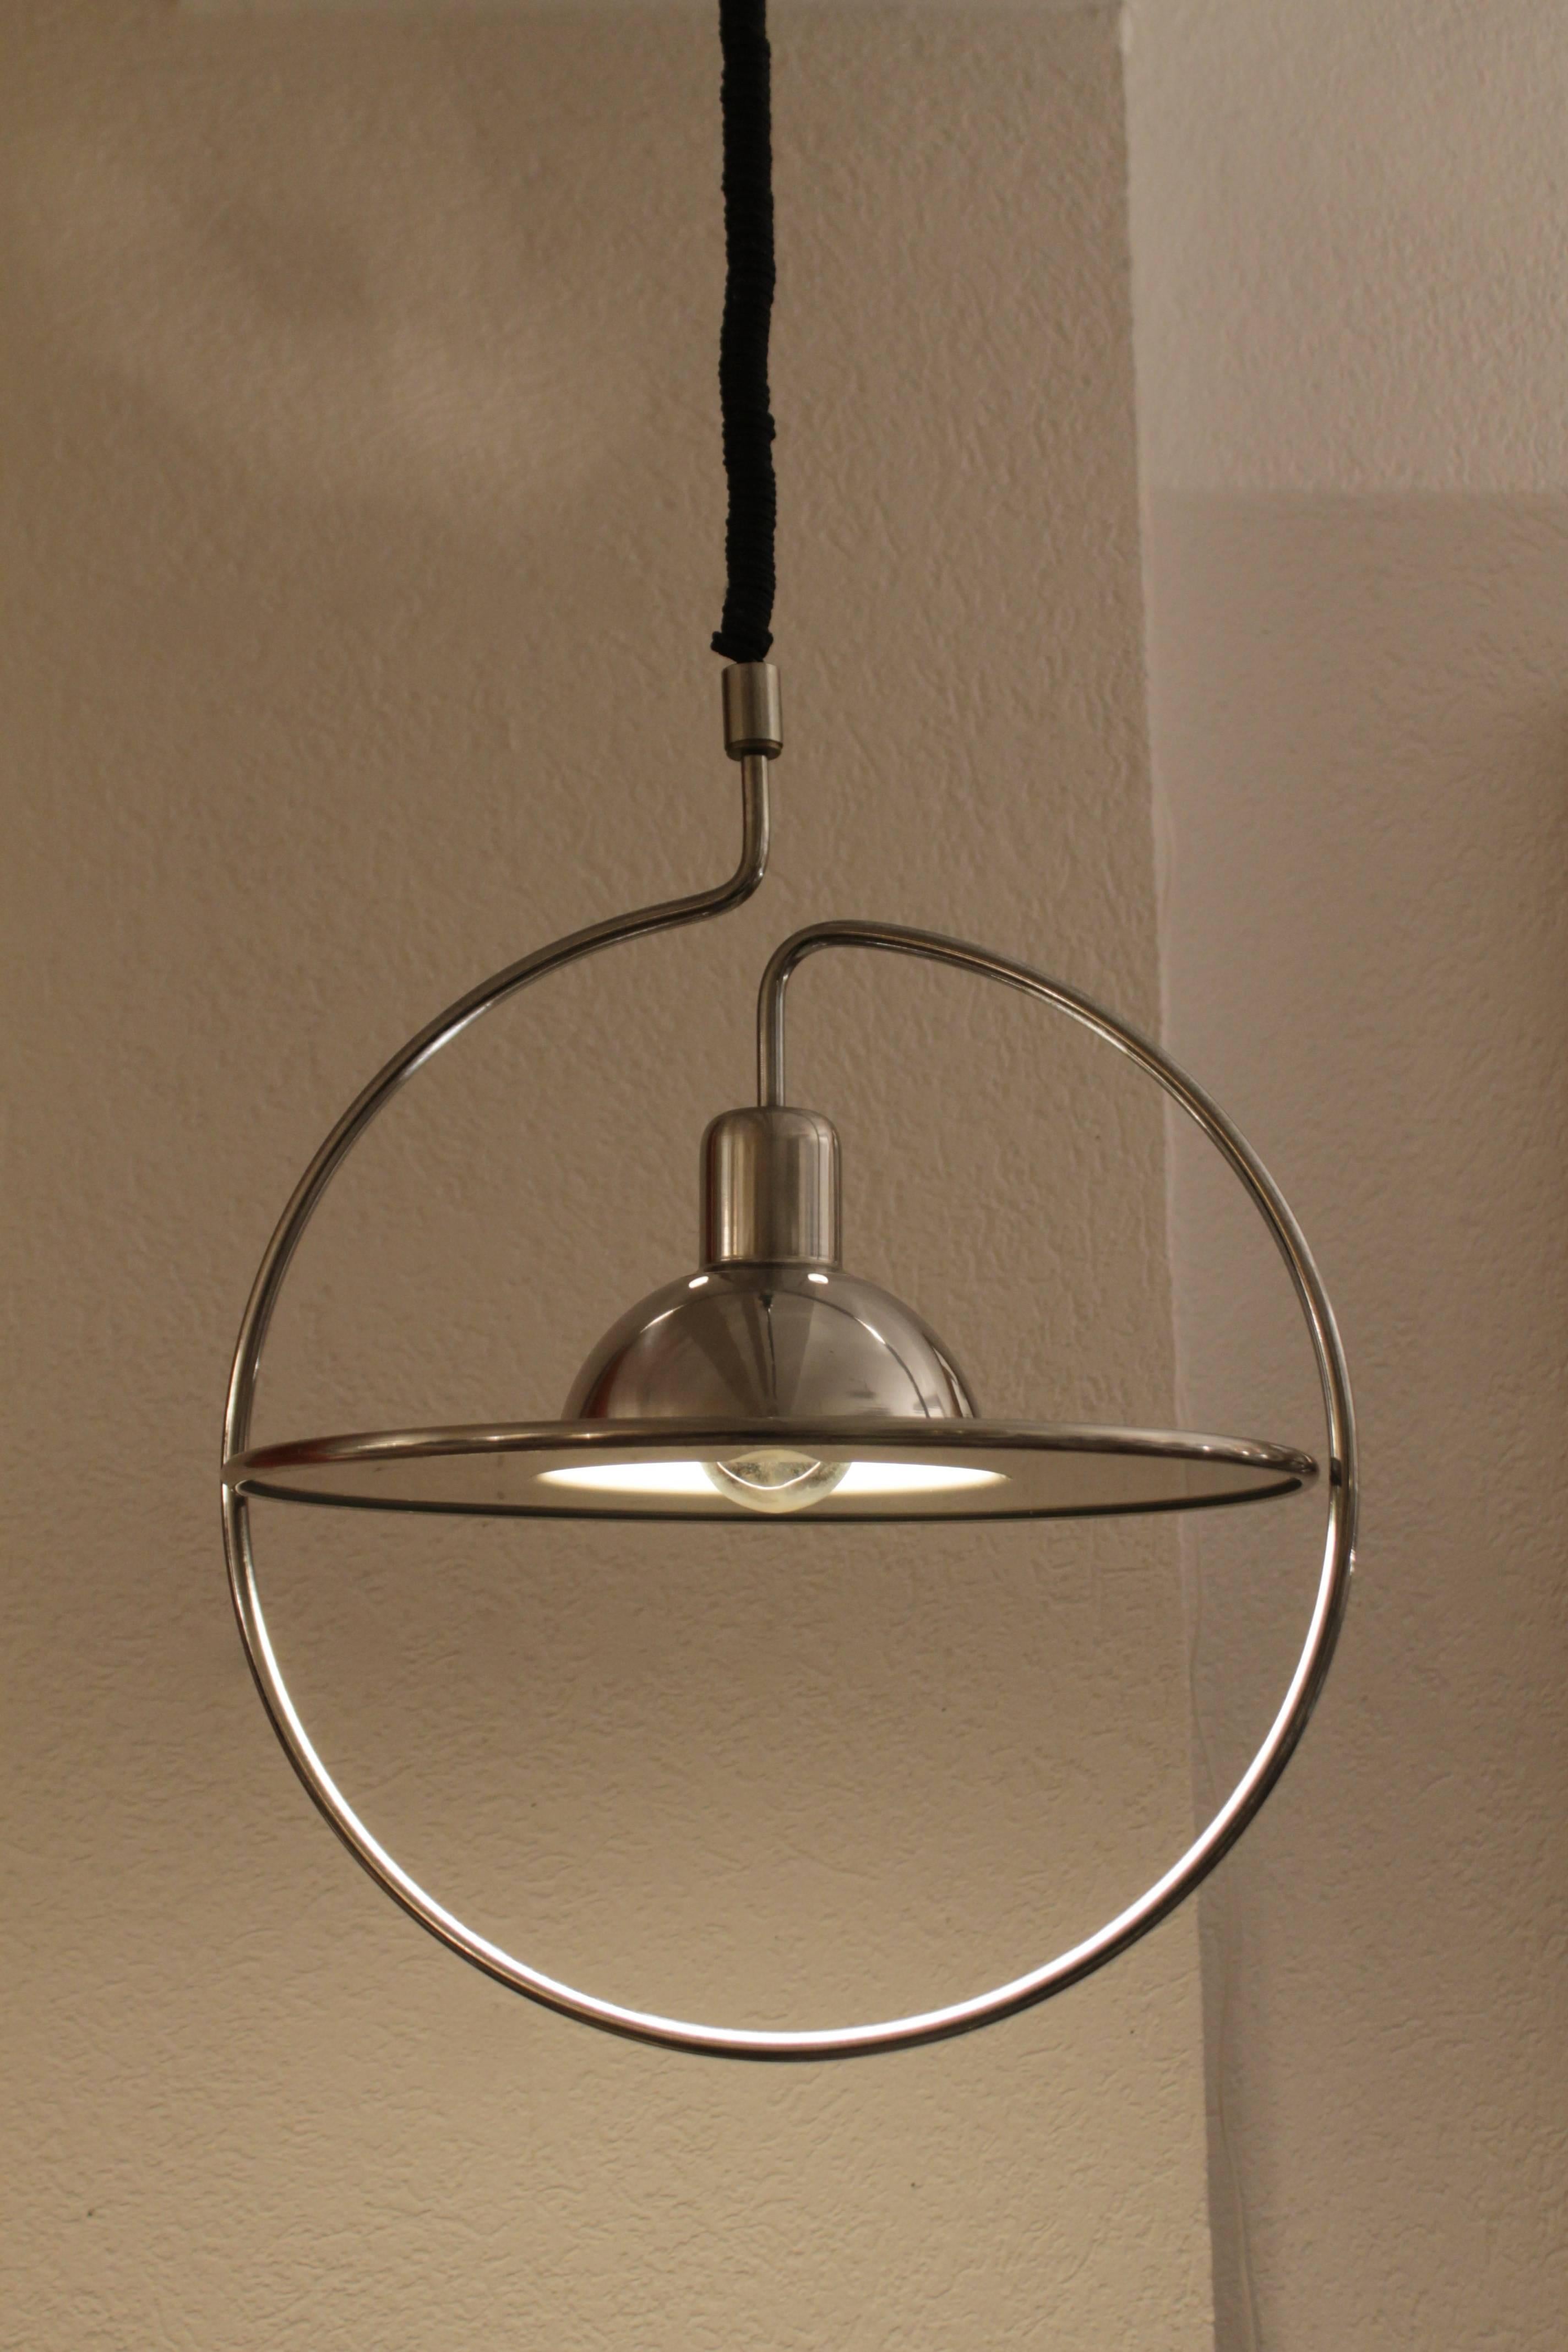 Set of four aluminum up and down system Saturn pendant lamp
Unknown origin, in the manner of Stilnovo or RAAK, 1970s creations
Nice quality, height adjustable.
 